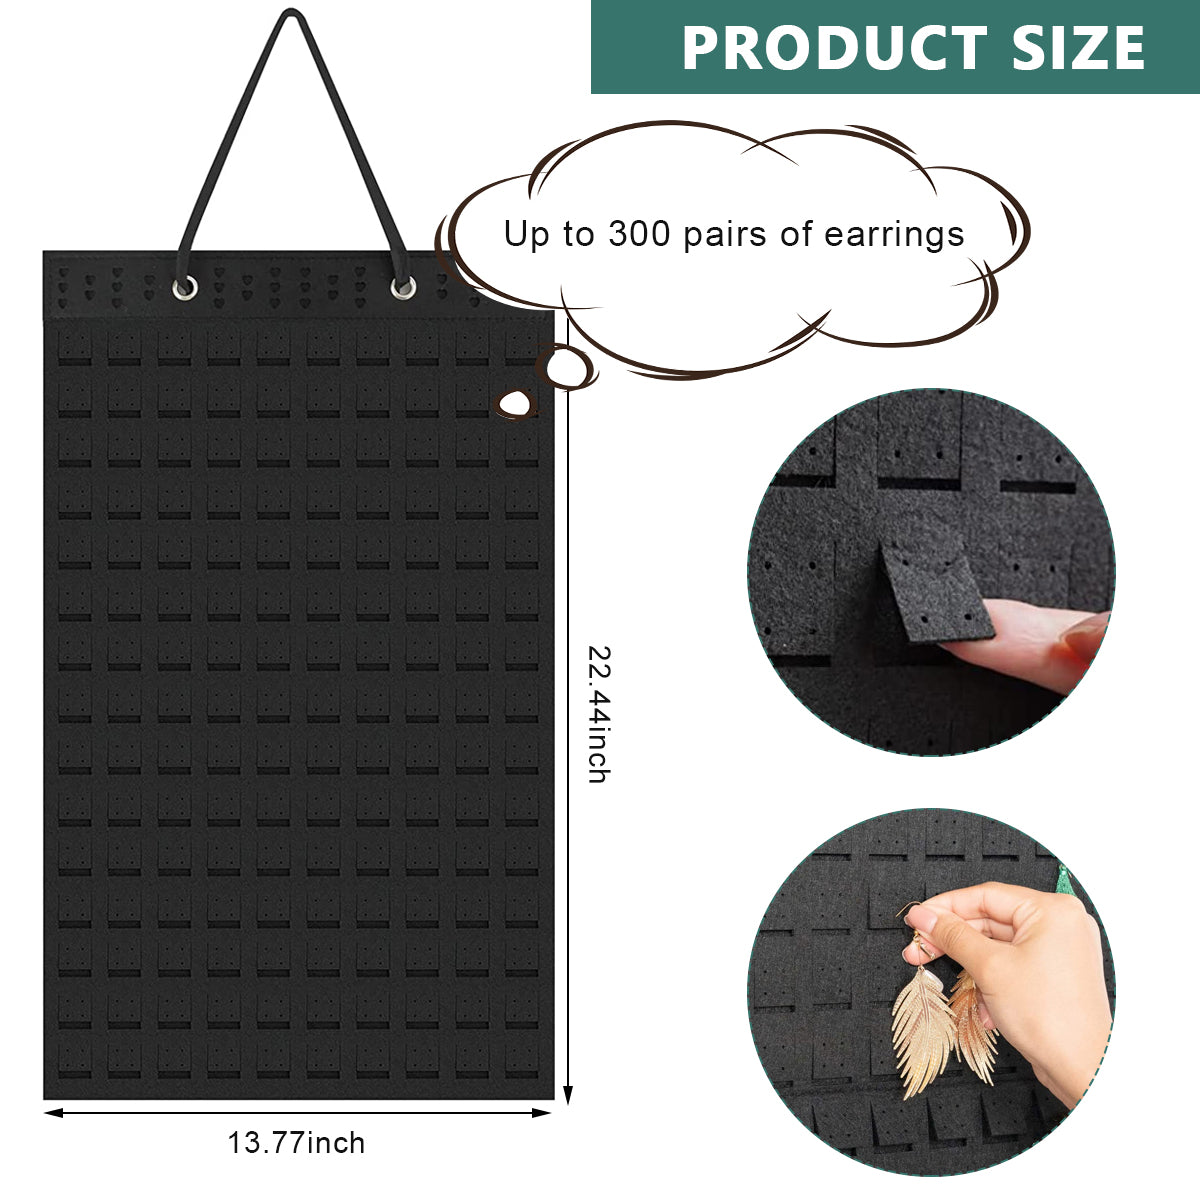 HASTHIP® Wall Hanging Earrings Organizer, Felt Earrings Holder Jewelry Organizer Hanger Earring Display for Earring Necklace Bracelet Ring Chain, Holds Up To 300 Pairs Earrings